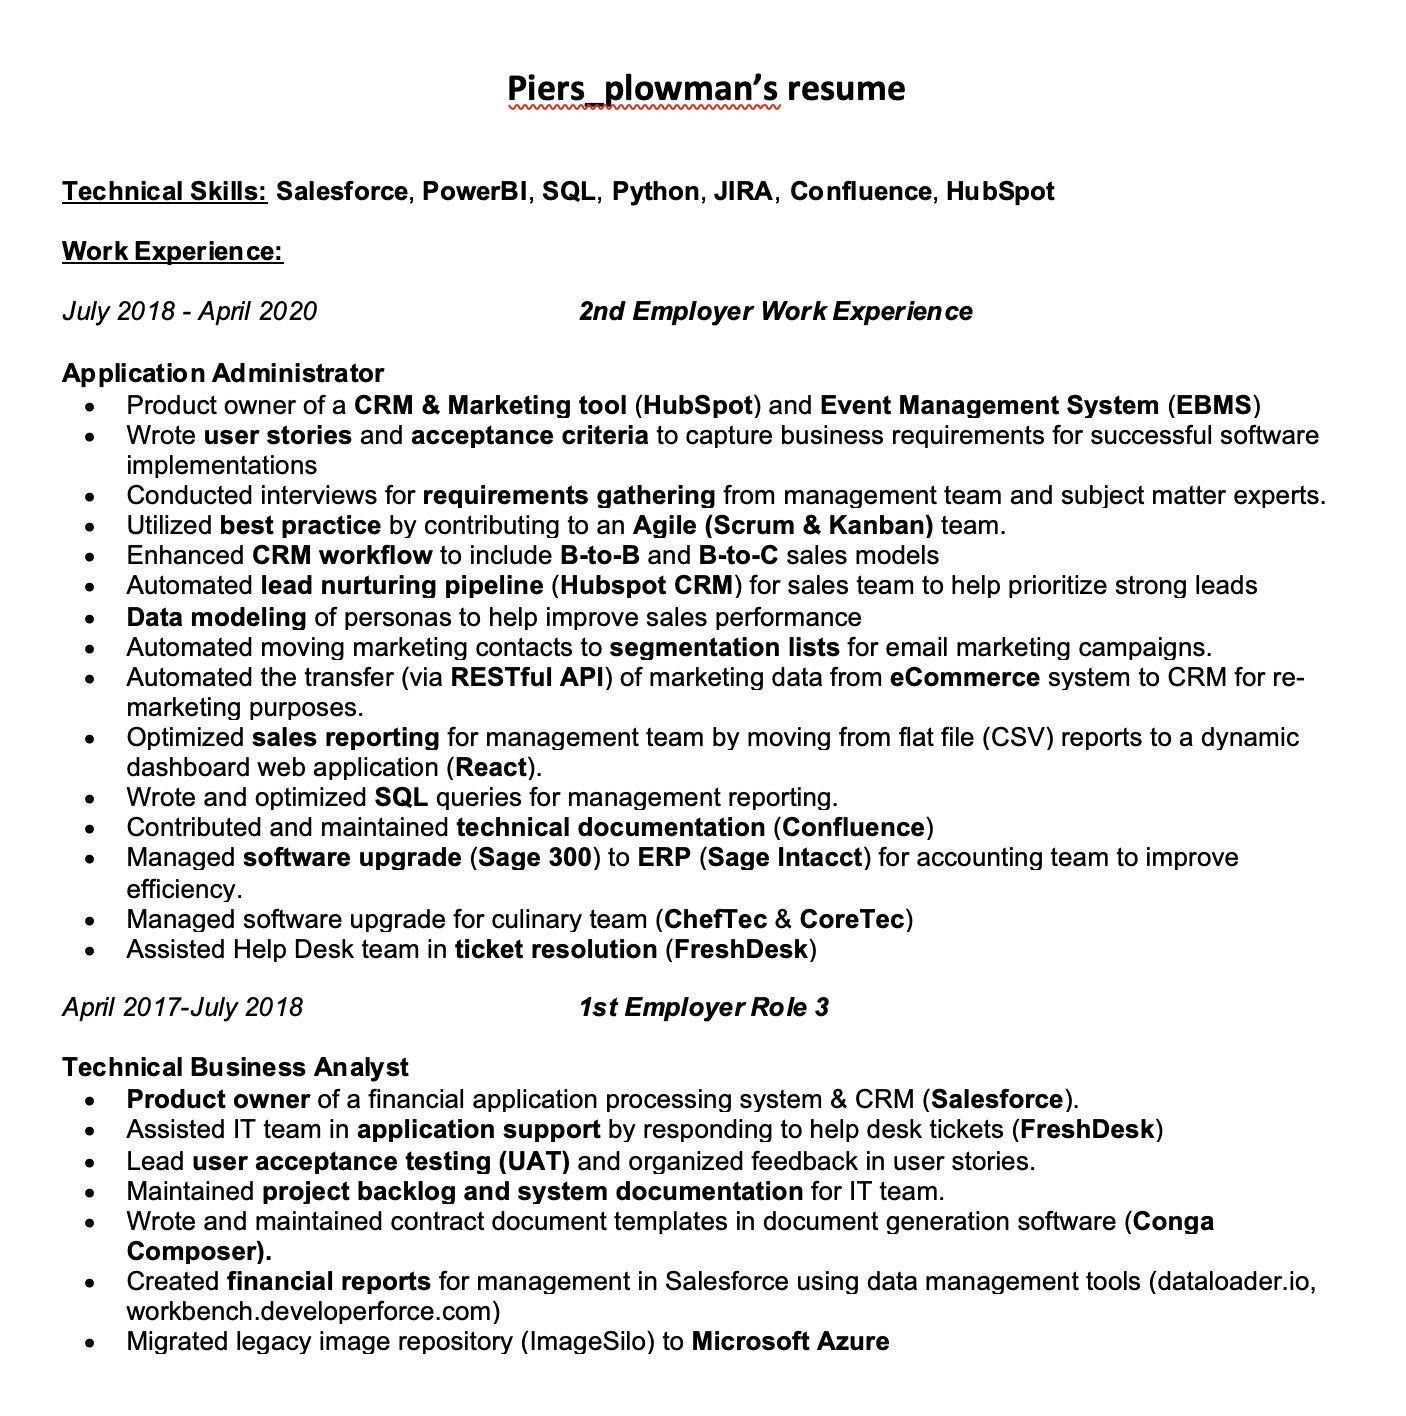 Web Api Business Analayst Sample Resume Business Analyst Looking for Resume Advice : R/resumes